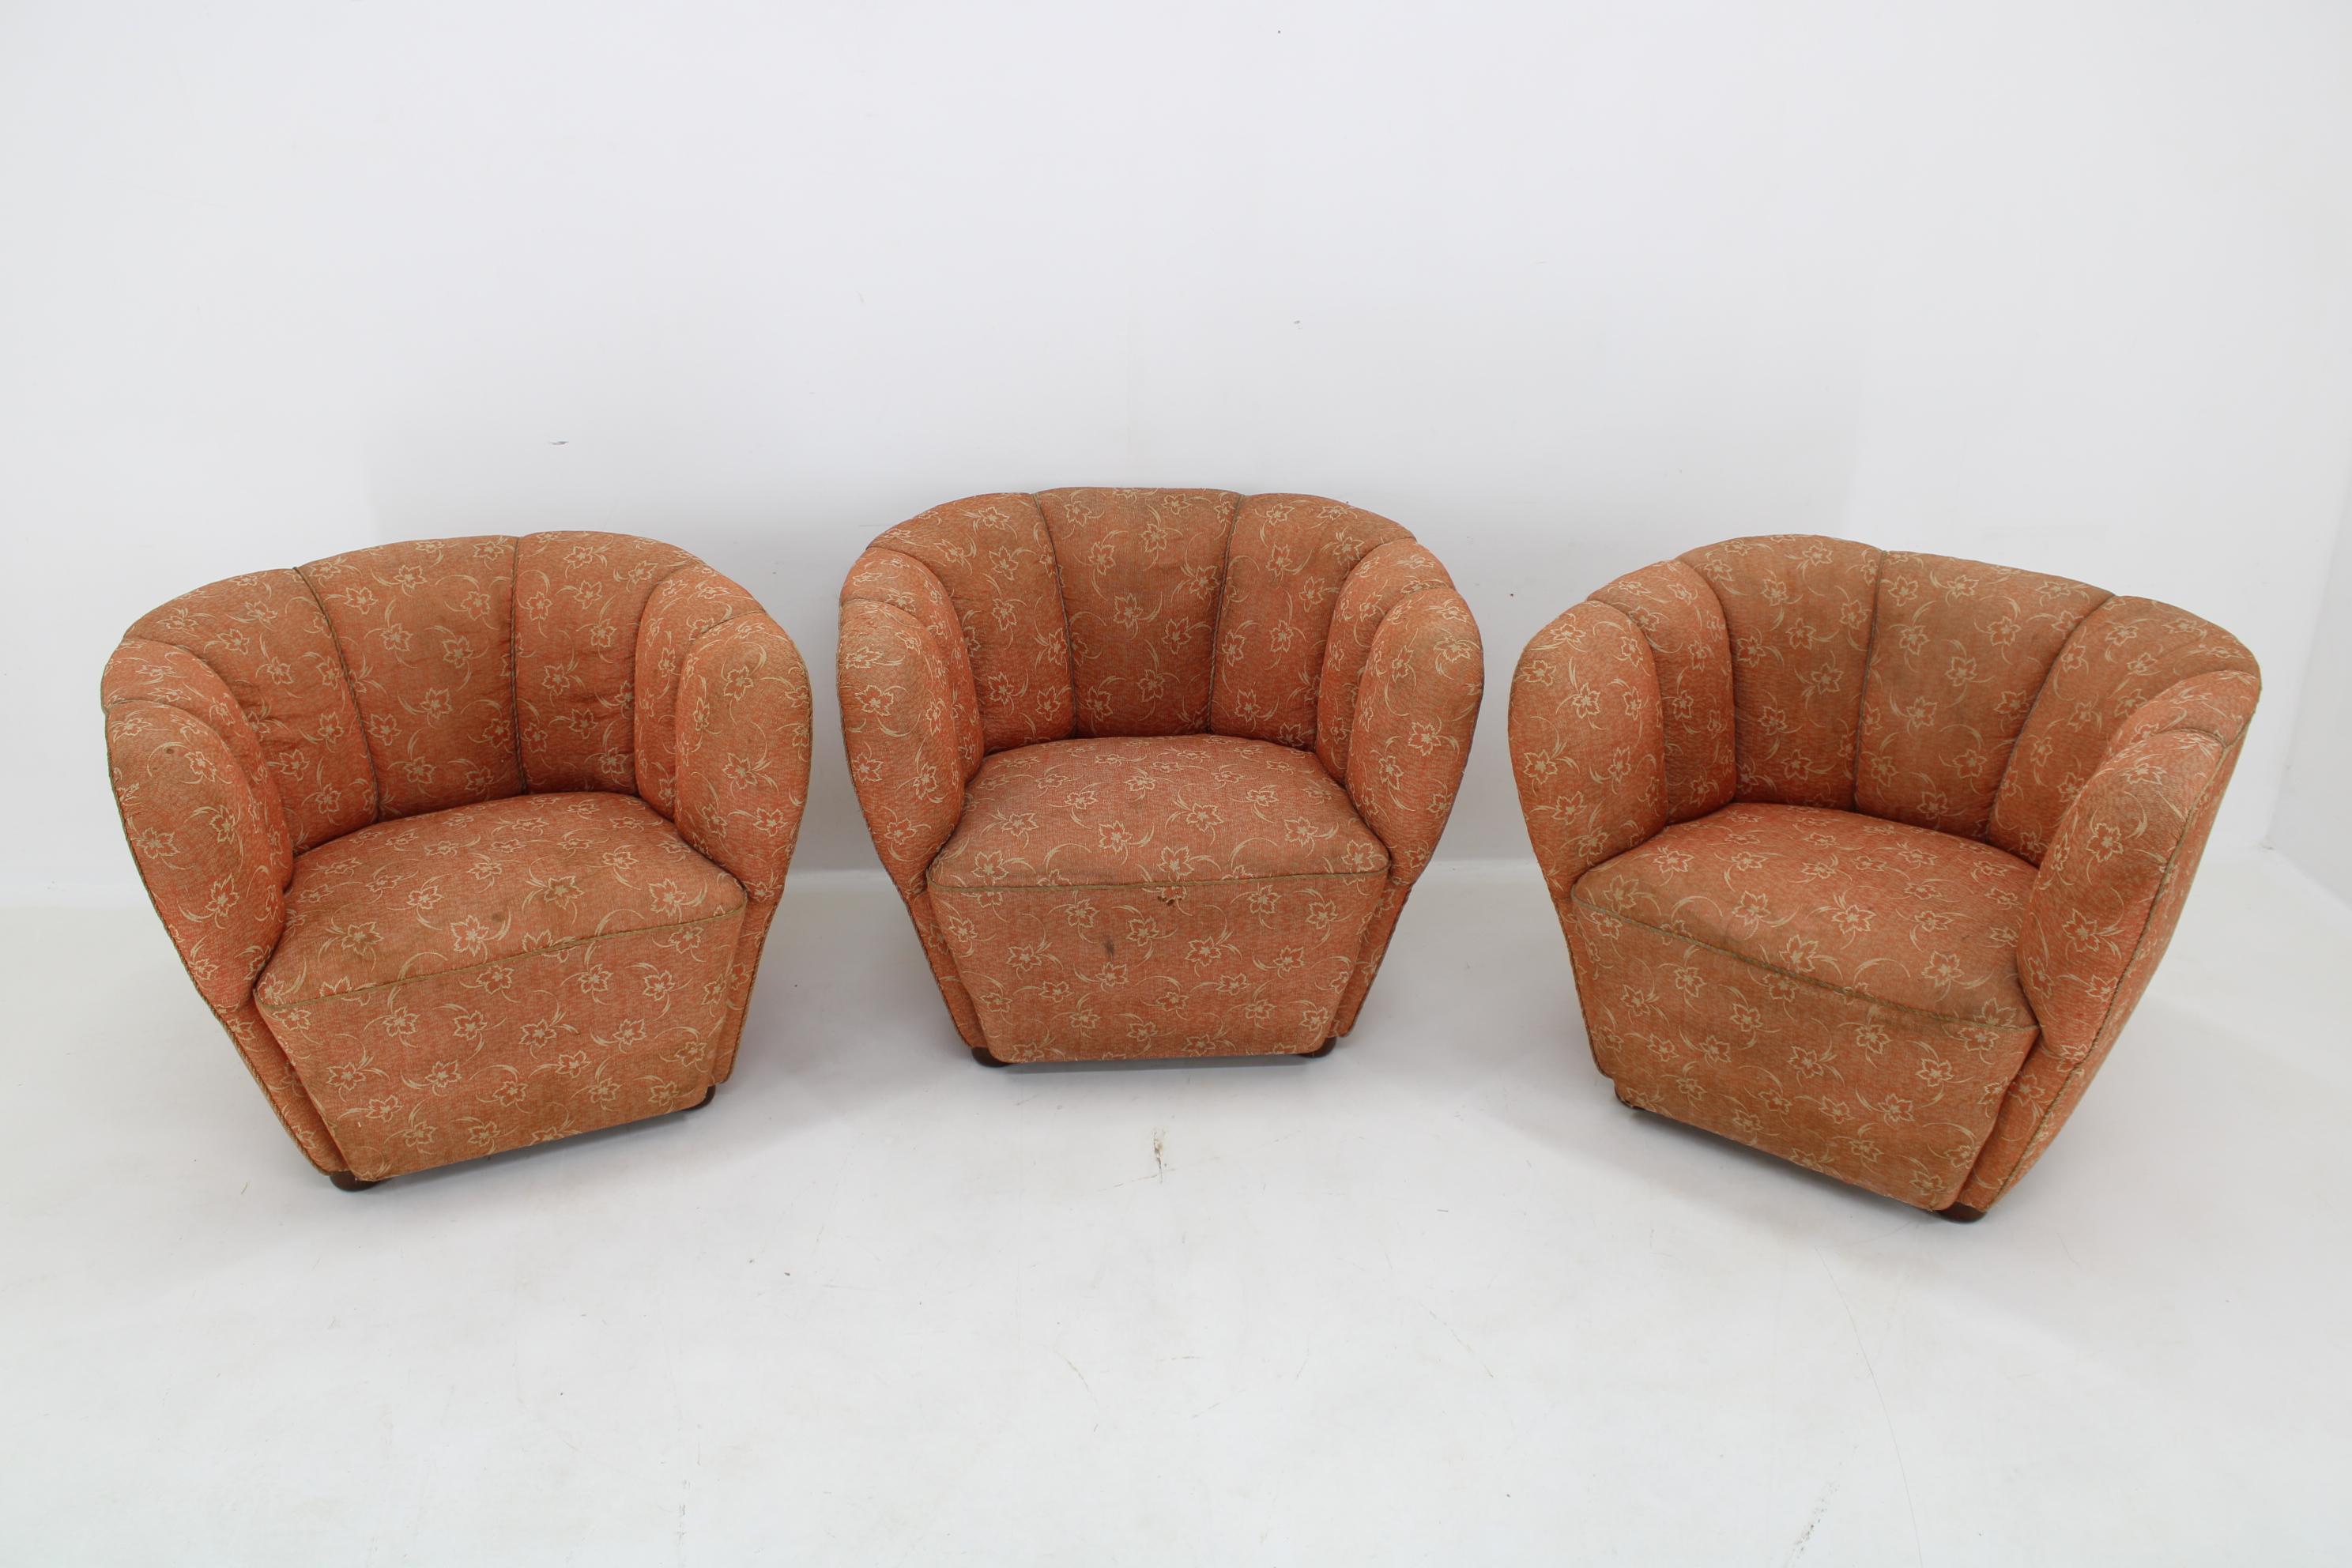 - 3 items available
- suitable for new upholstery 